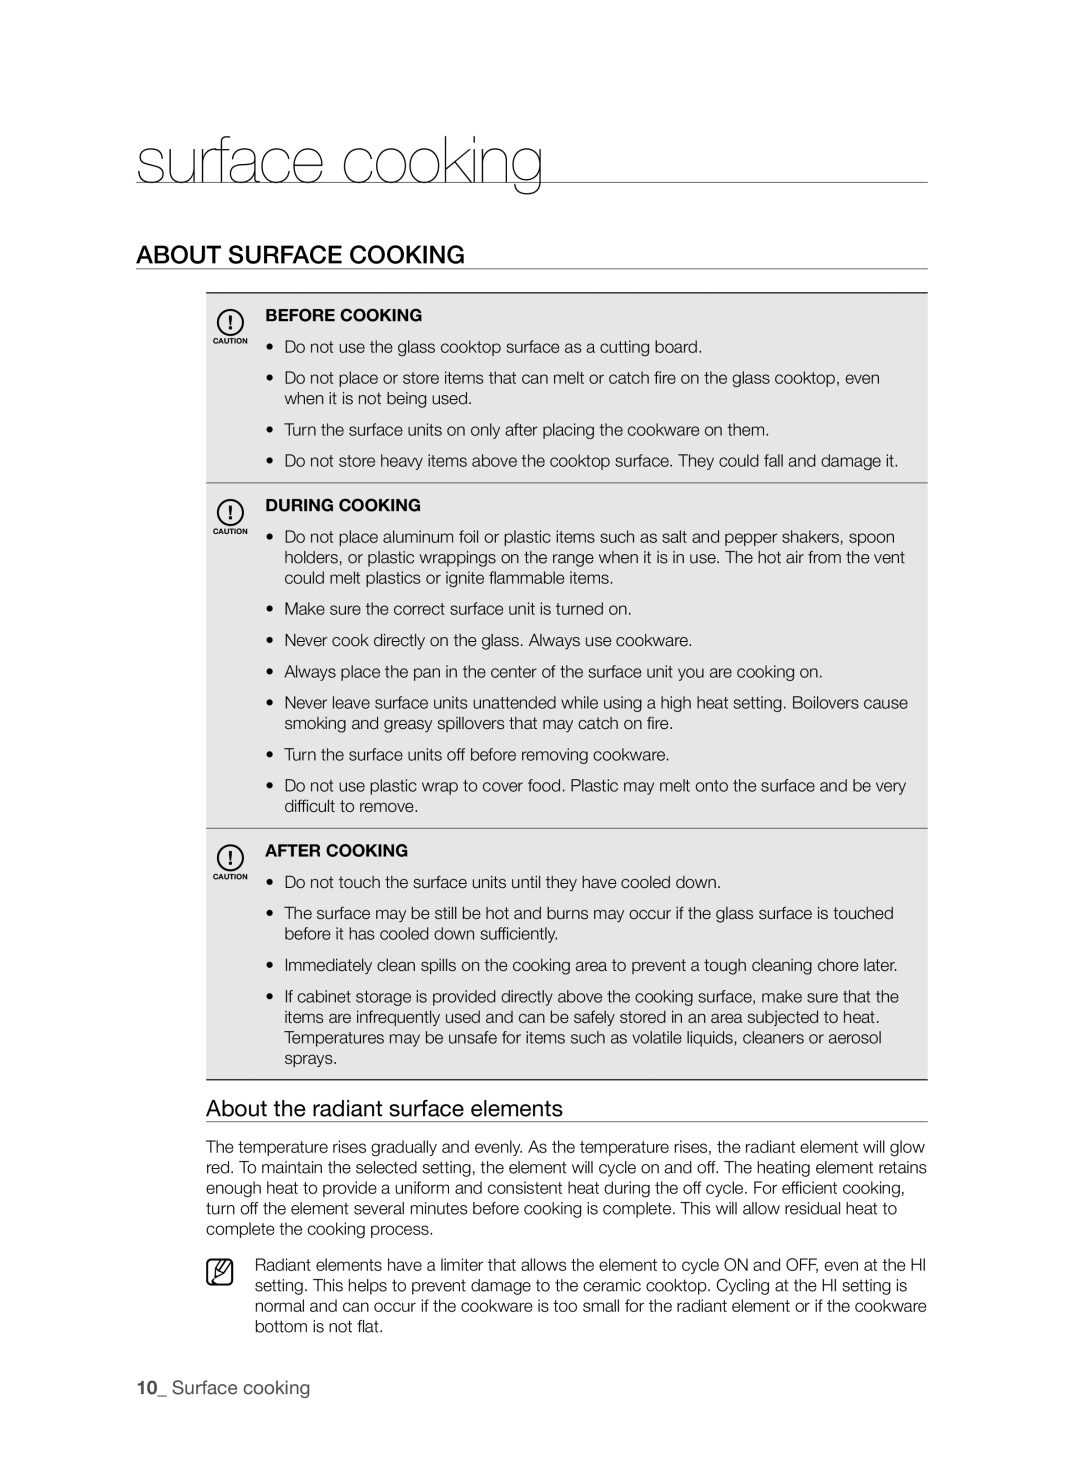 Samsung FTQ353 user manual About surface cooking, About the radiant surface elements, Surface cooking 